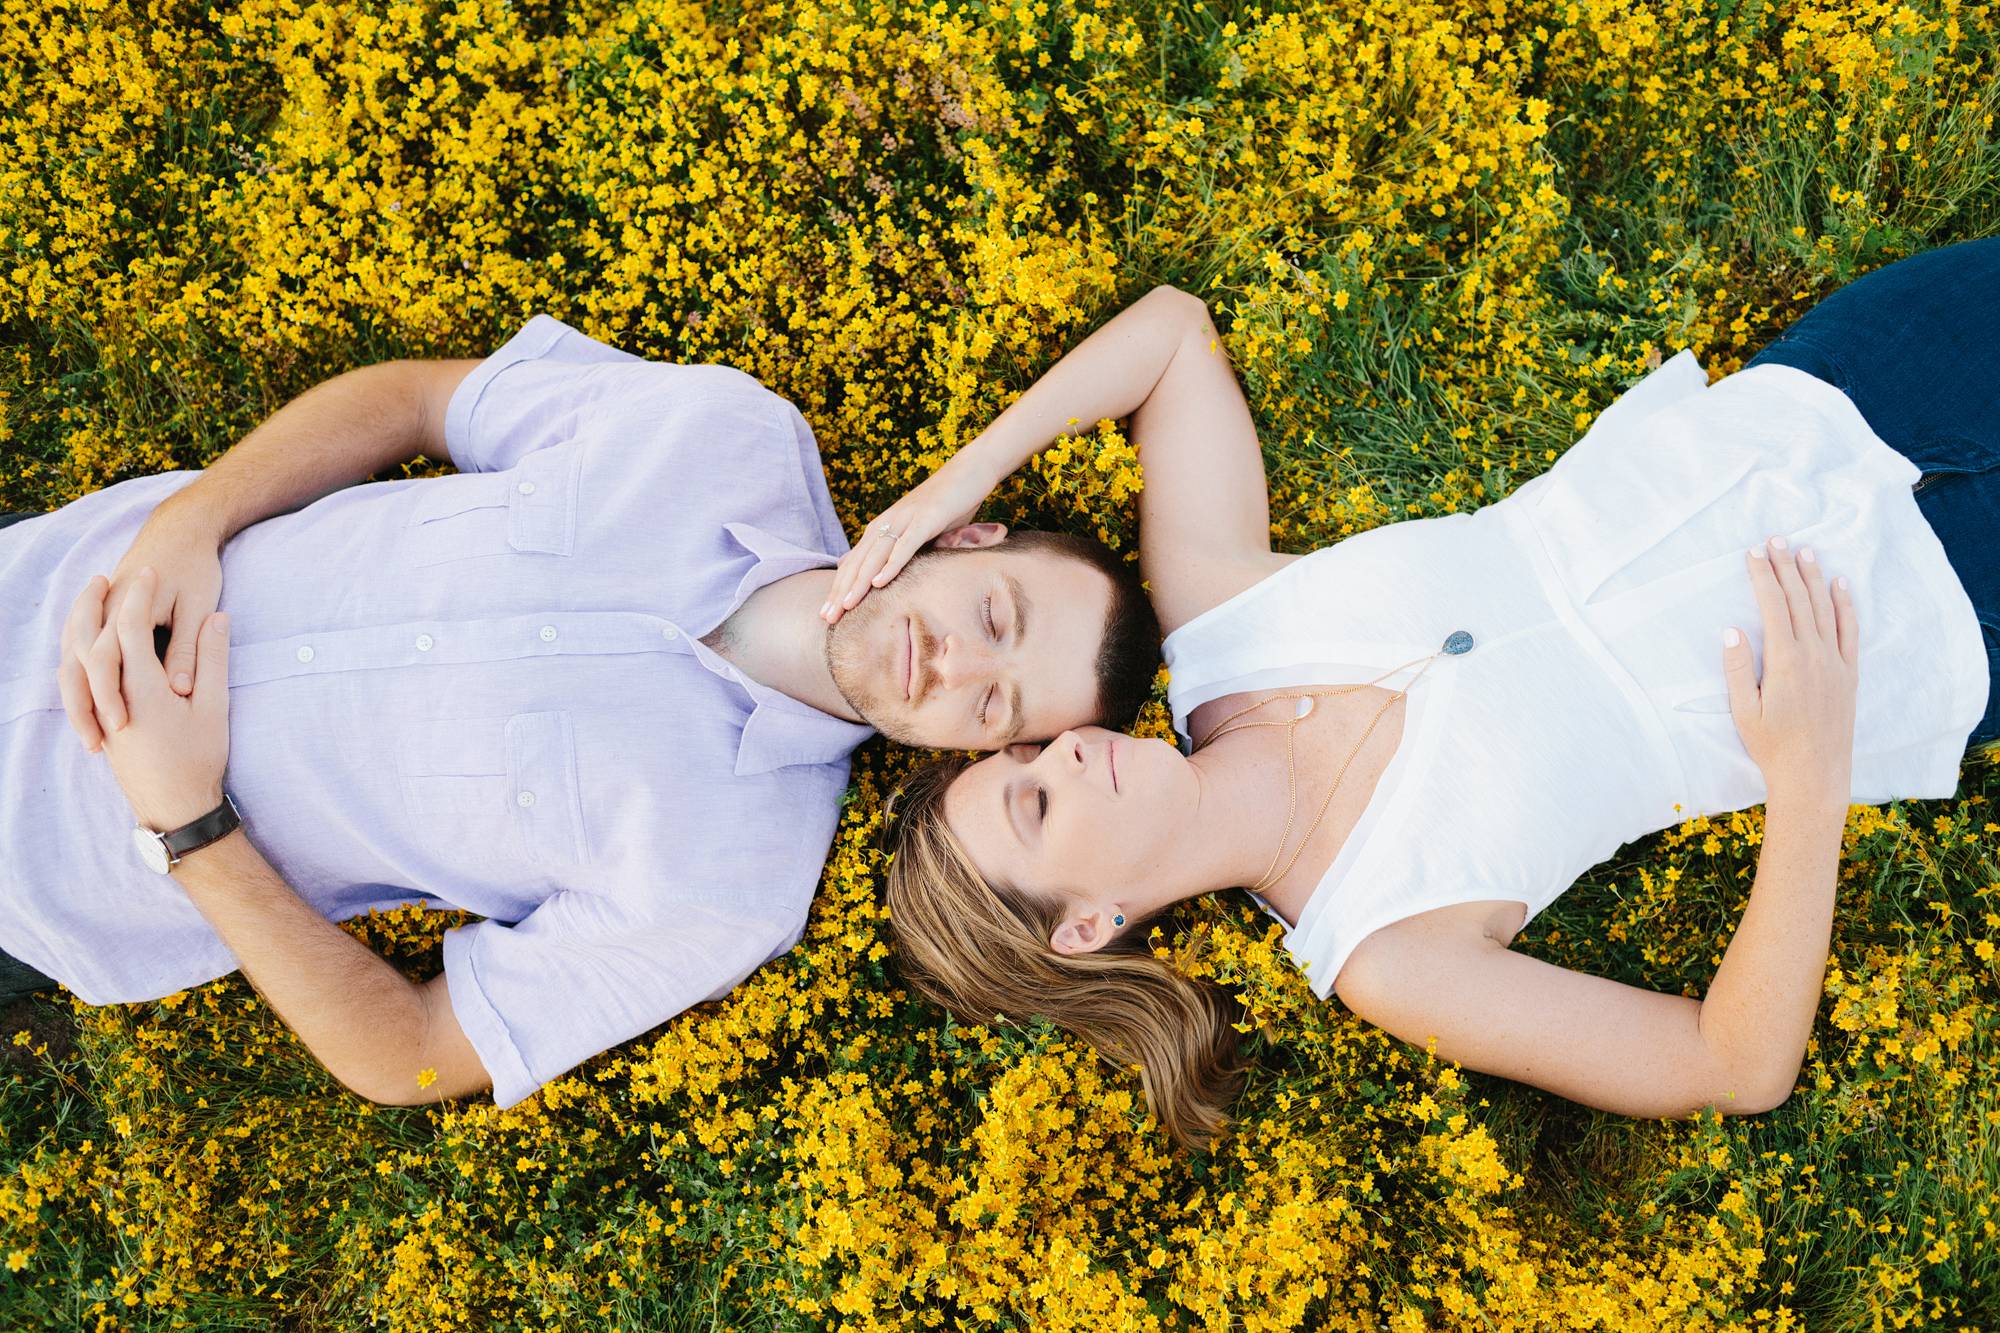 The couple laying in the yellow fields. 